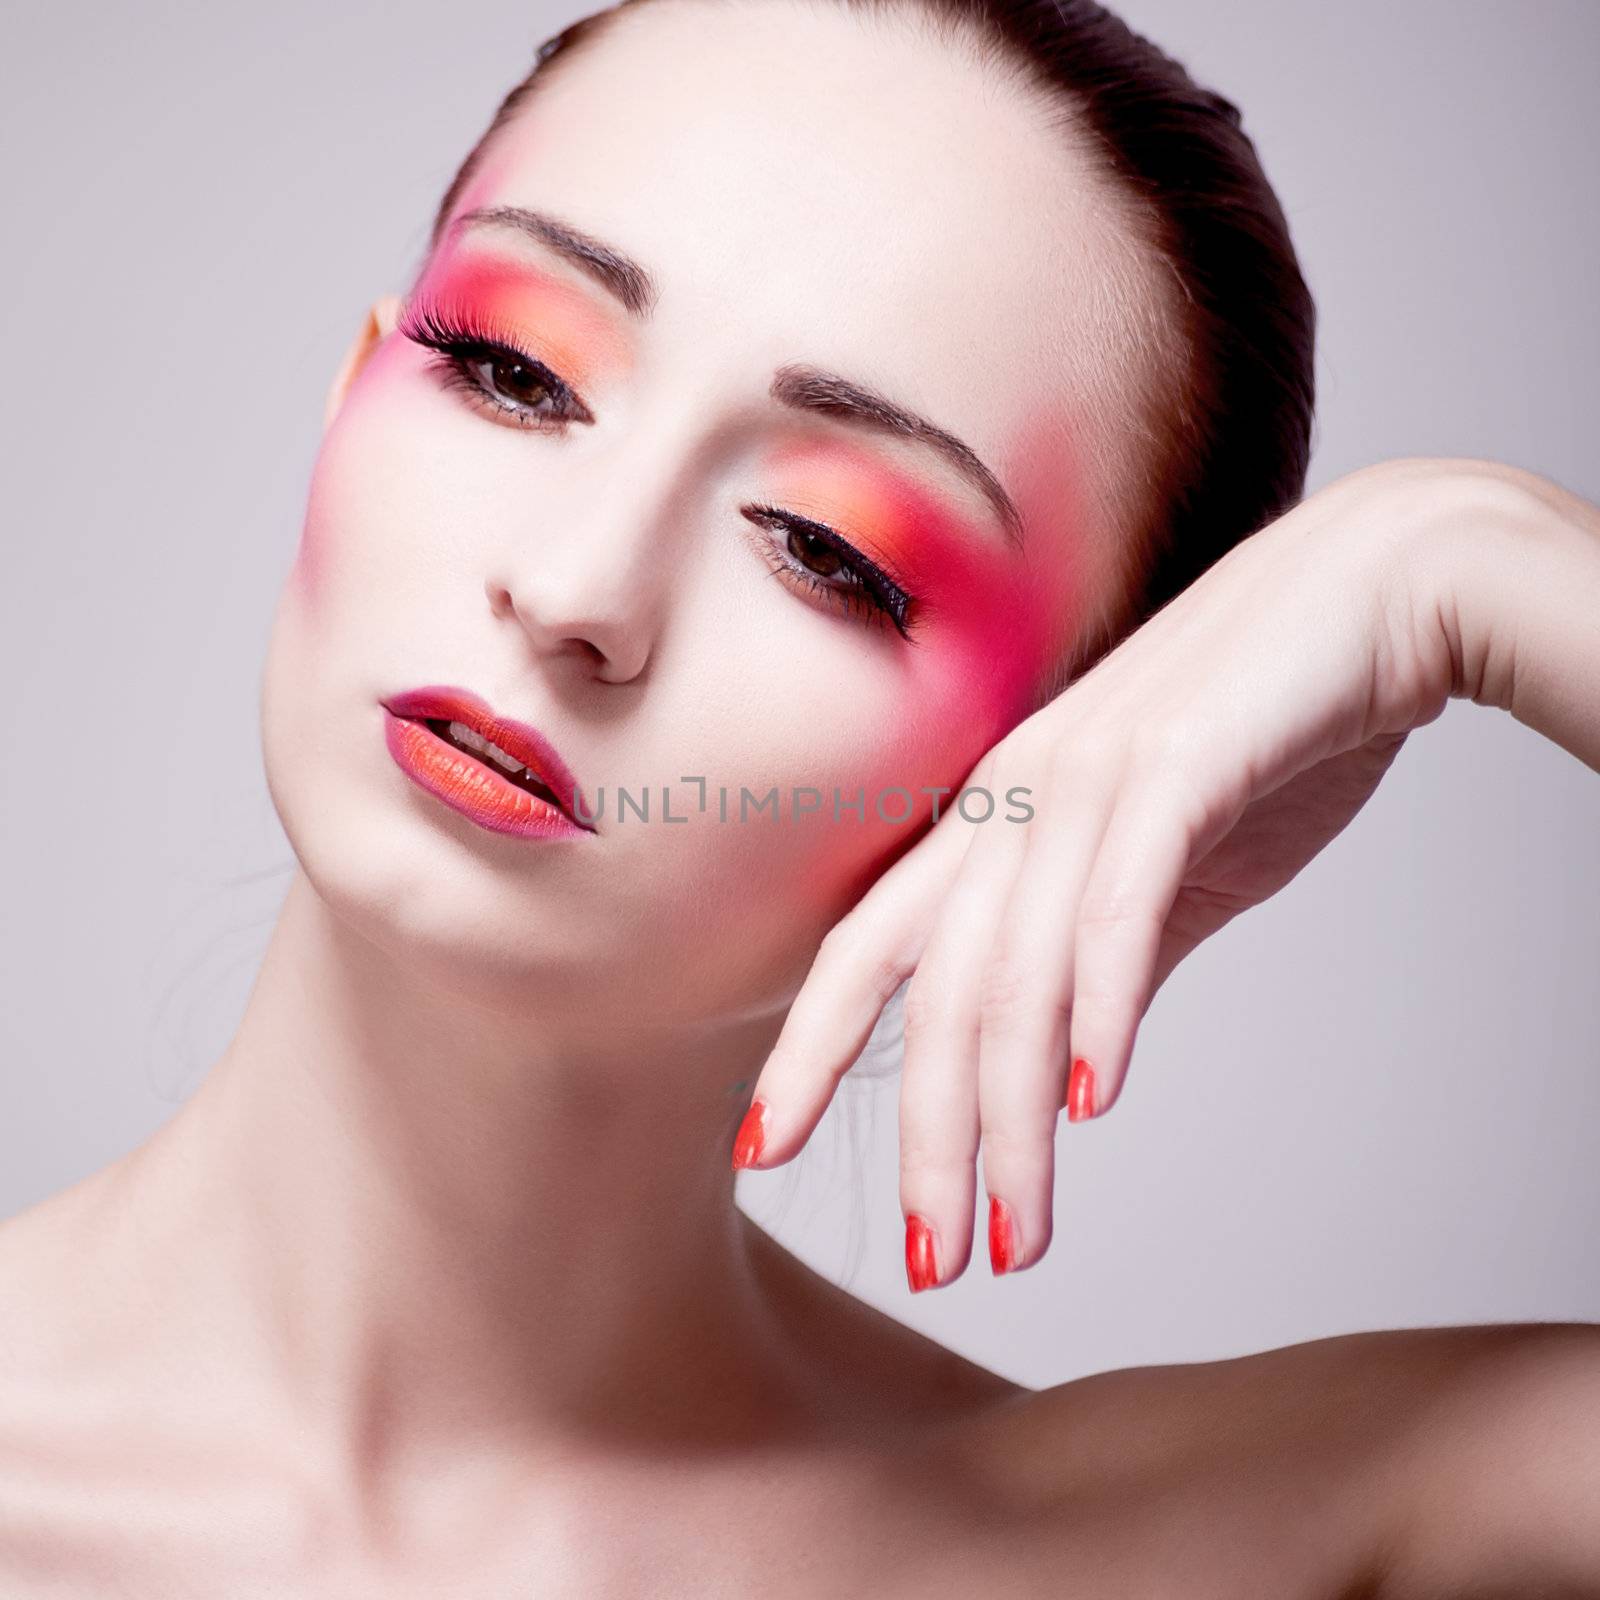 woman portrait with extreme make up in orange and pink by juniart